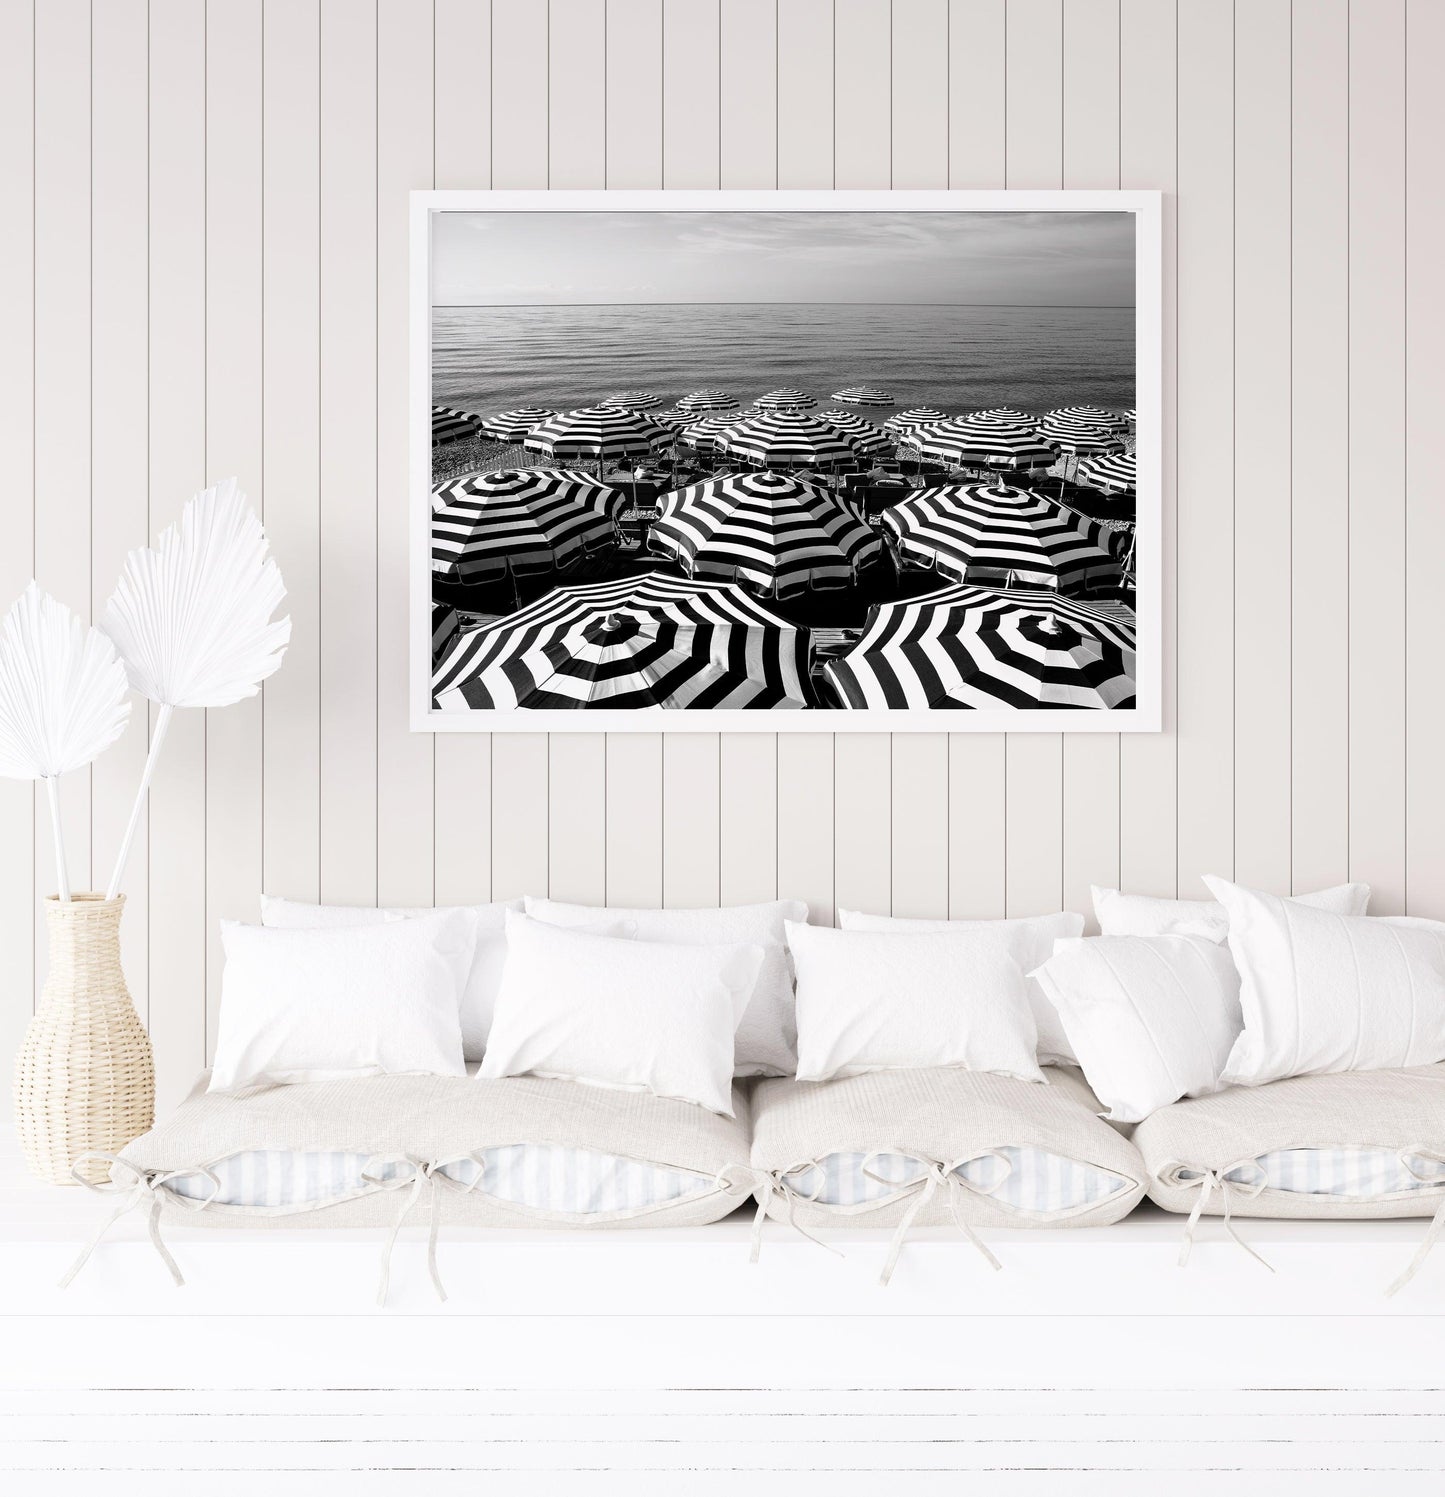 Black and White Striped Beach Umbrellas | French Riviera Photography Print - Departures Print Shop